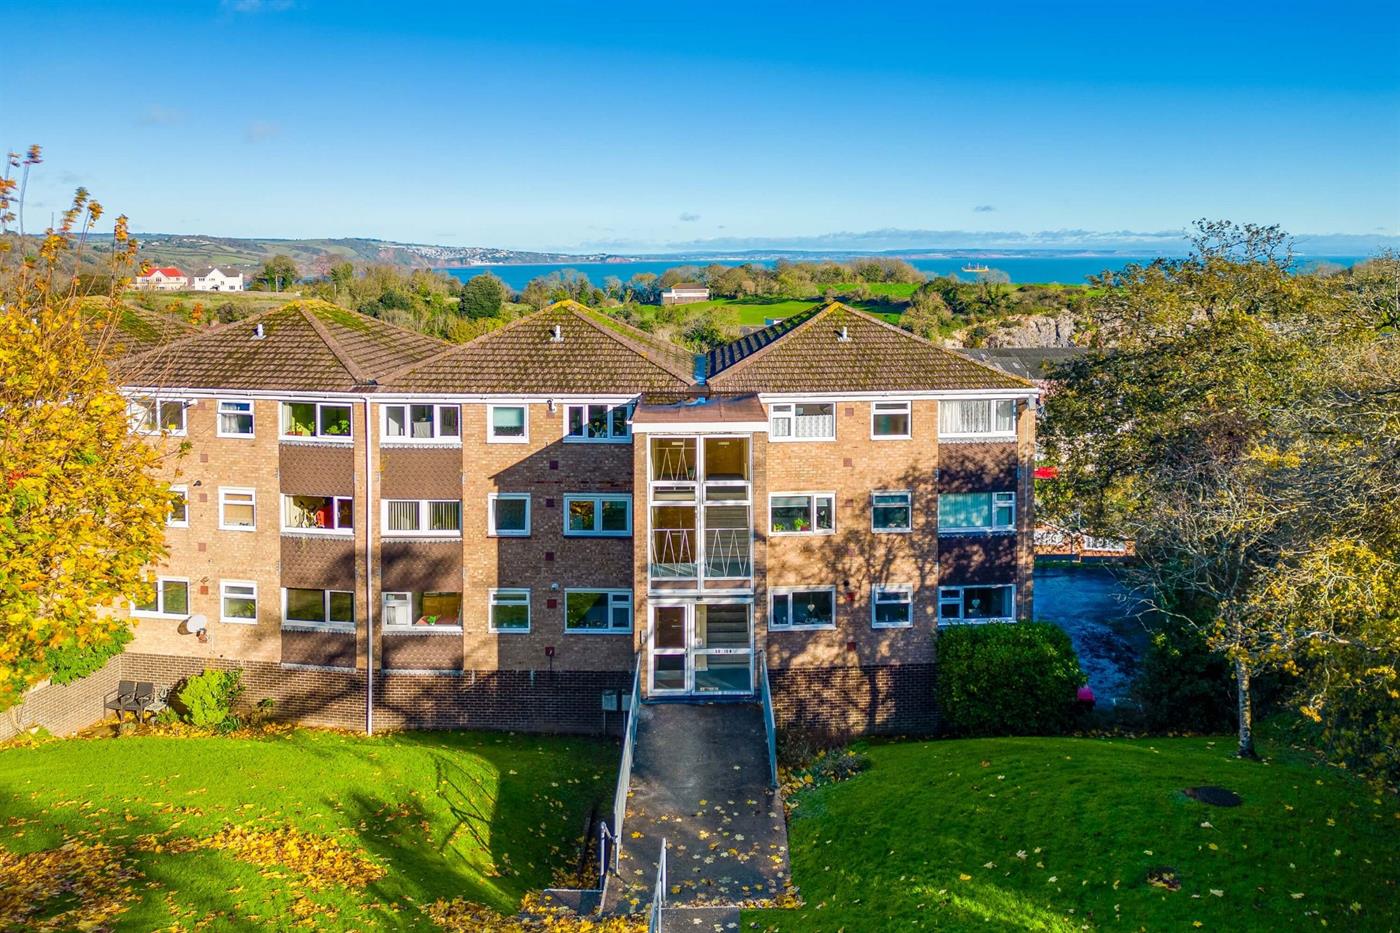 2 Bedroom Apartment for Sale: Langstone Close, Babbacombe, Torquay, TQ1 3TY